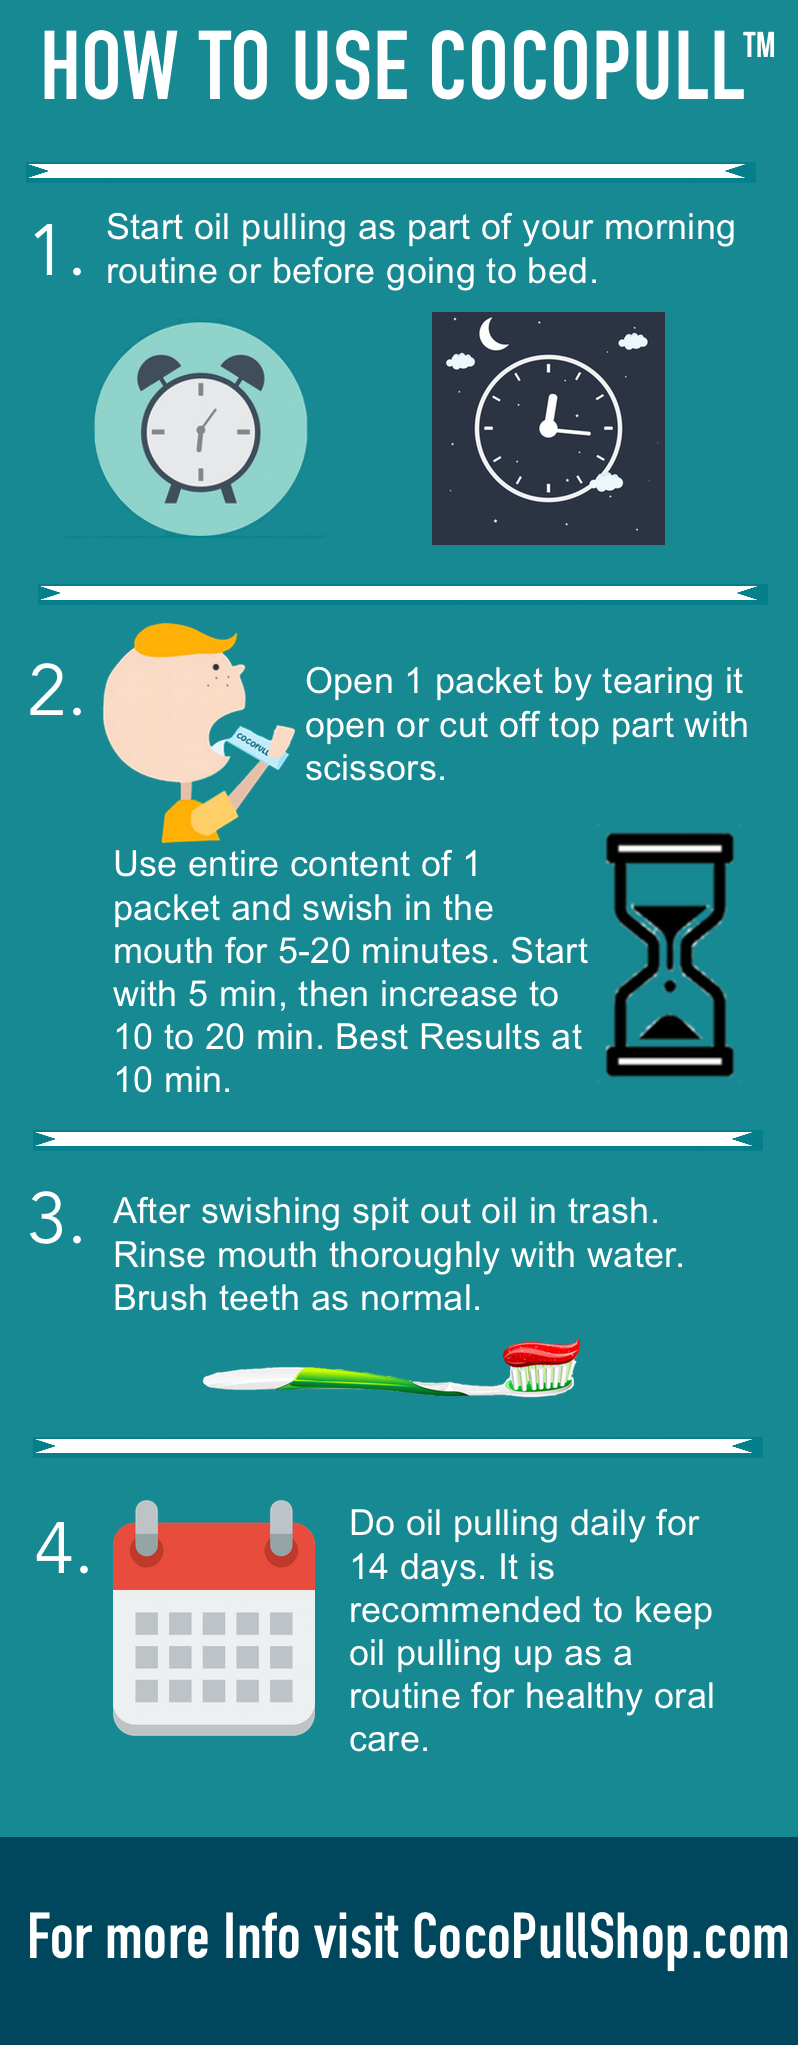 where can I to buy oil pulling - cocopull packets with coconut oil and peppermint oil